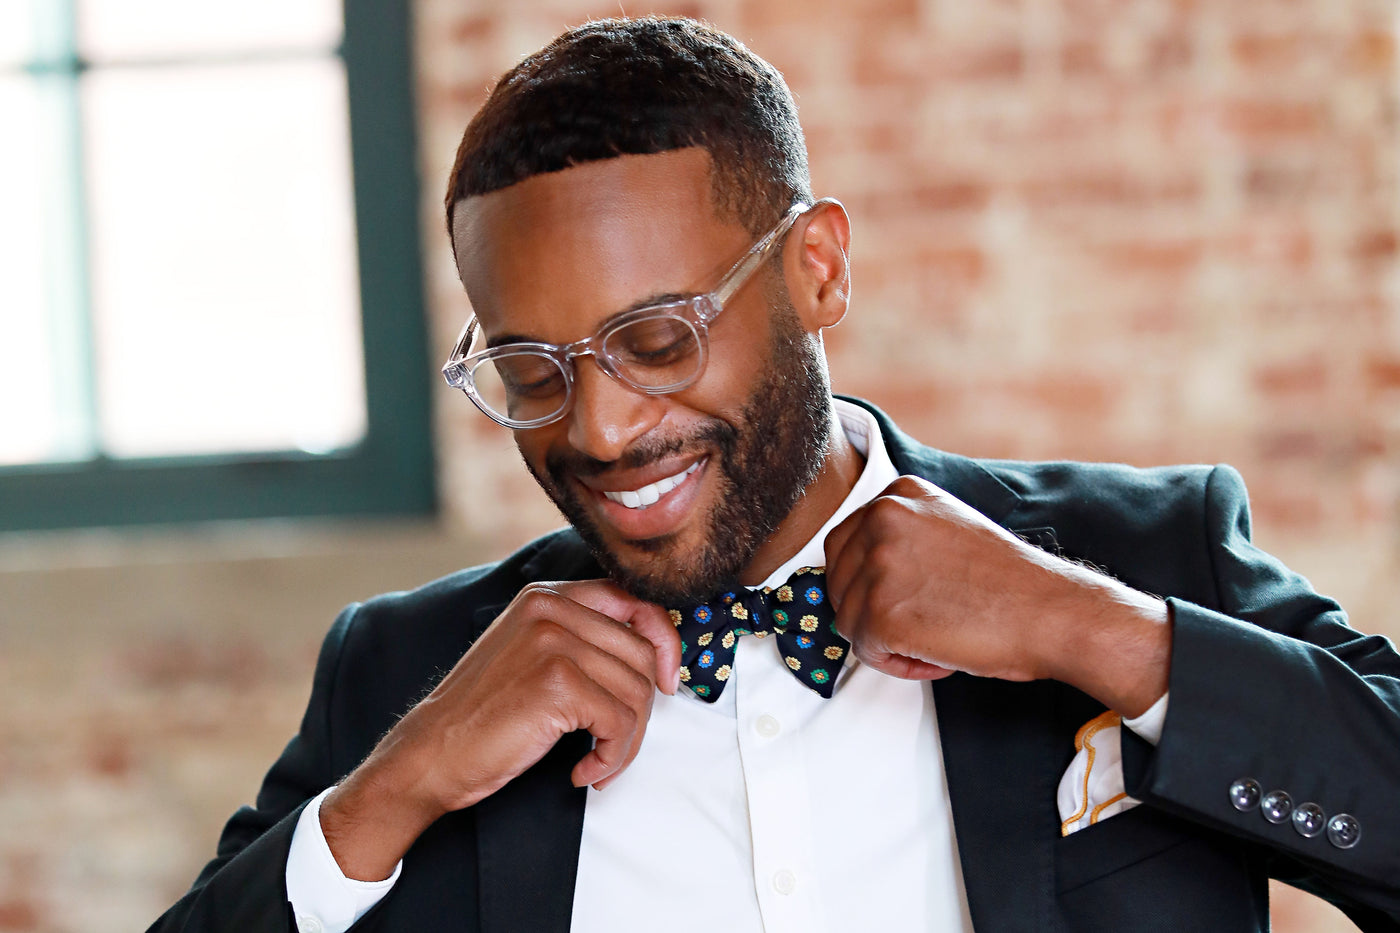 A well-dressed man wearing blue light glasses adjusting his bow tie